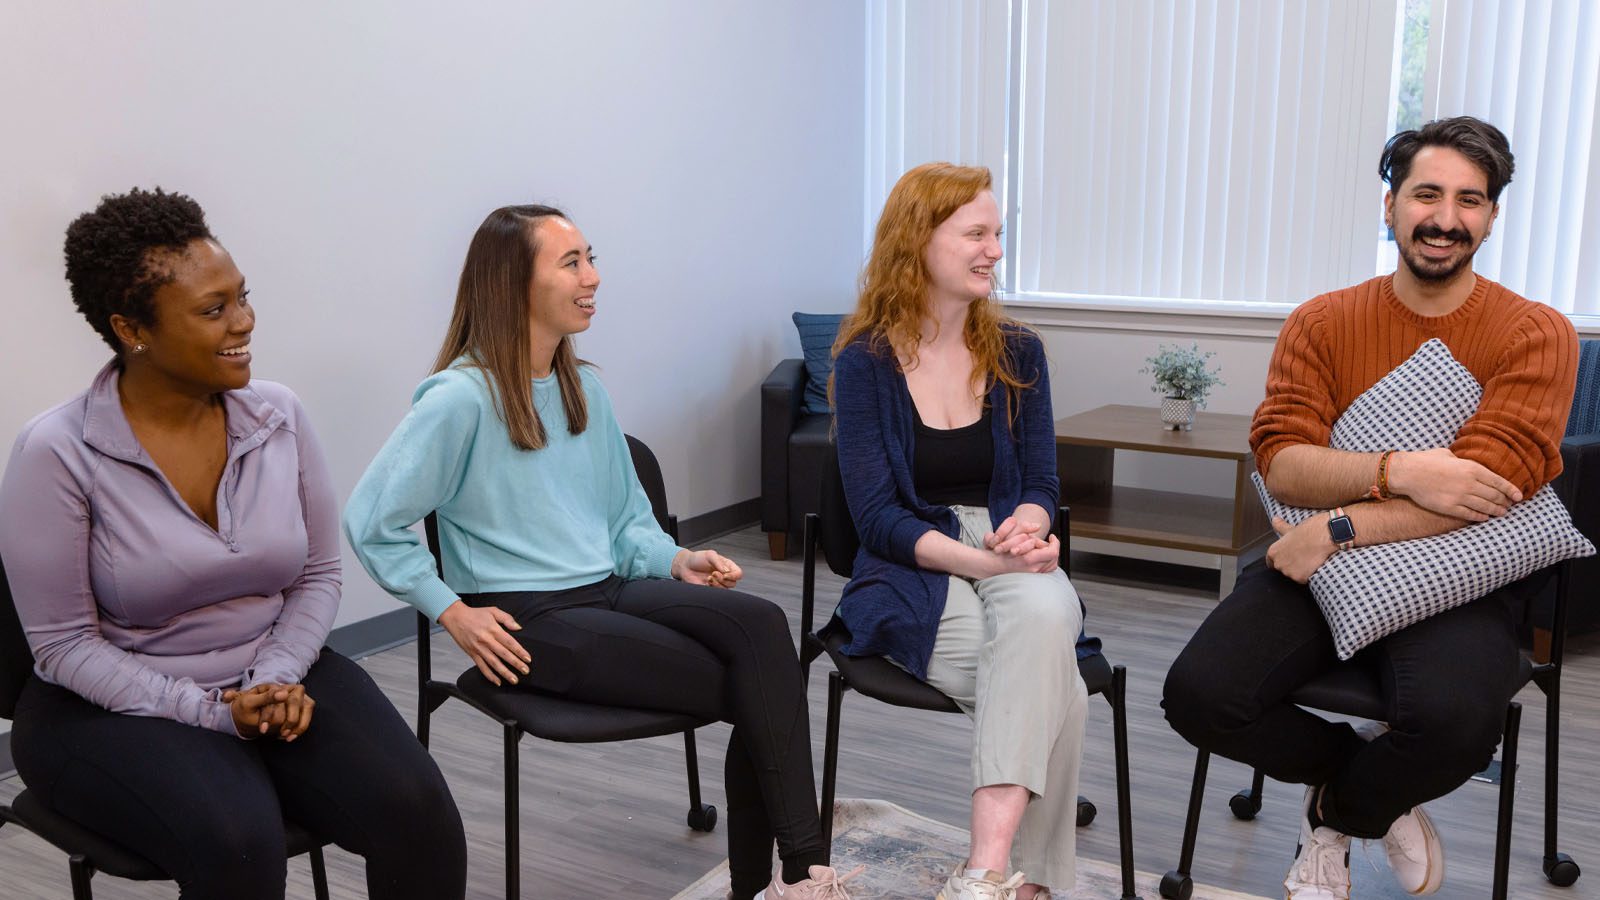 Four young adults smiling and engaged in a conversation while seated in a circle during a group therapy session in a room with soft natural lighting.